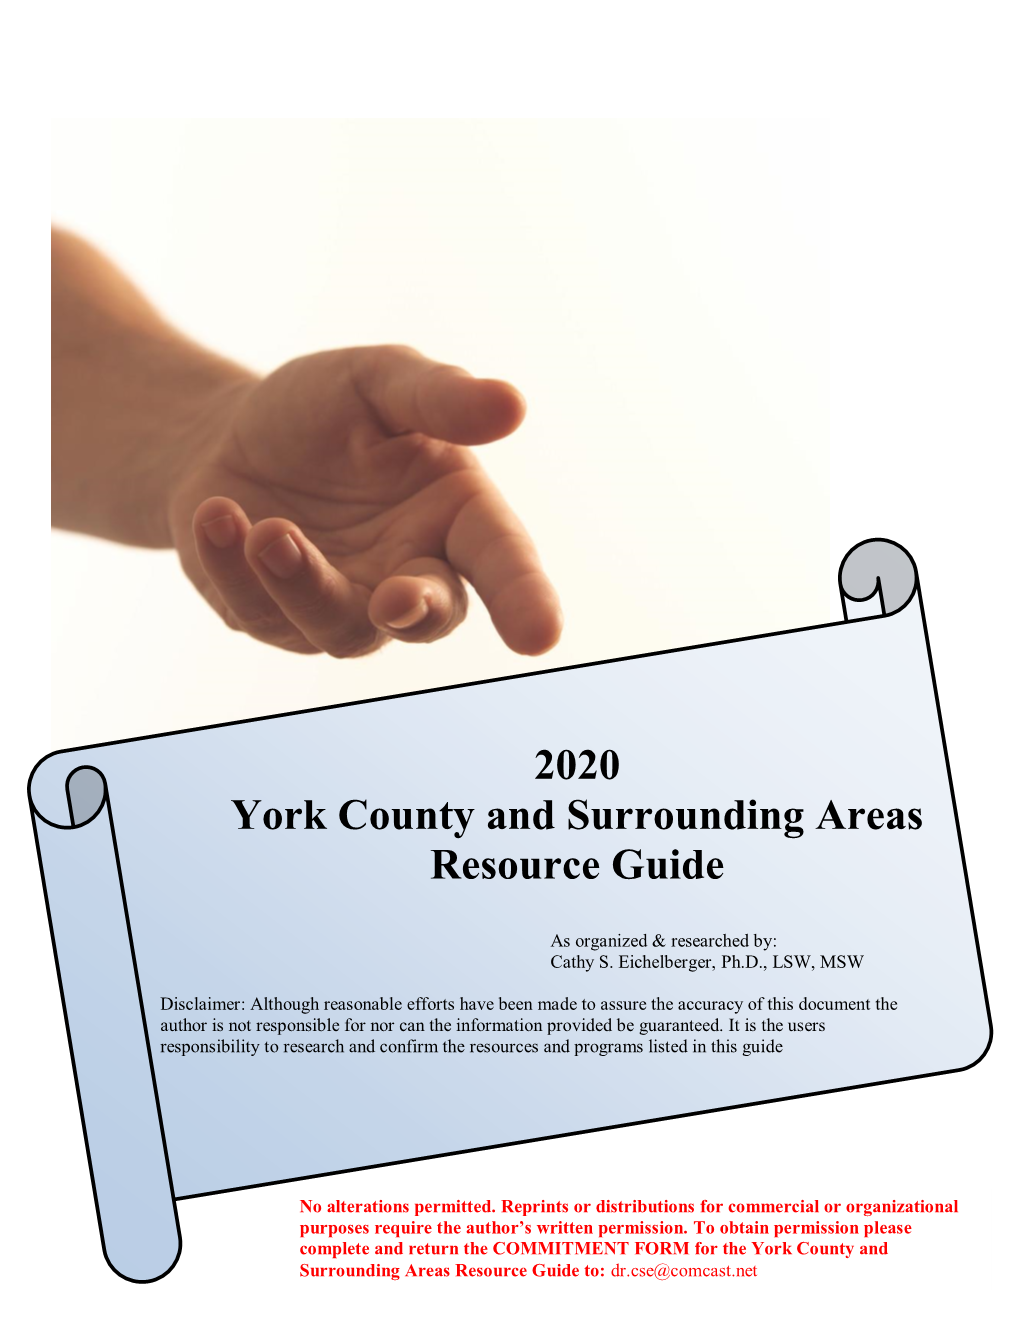 2020 York County and Surrounding Areas Resource Guide